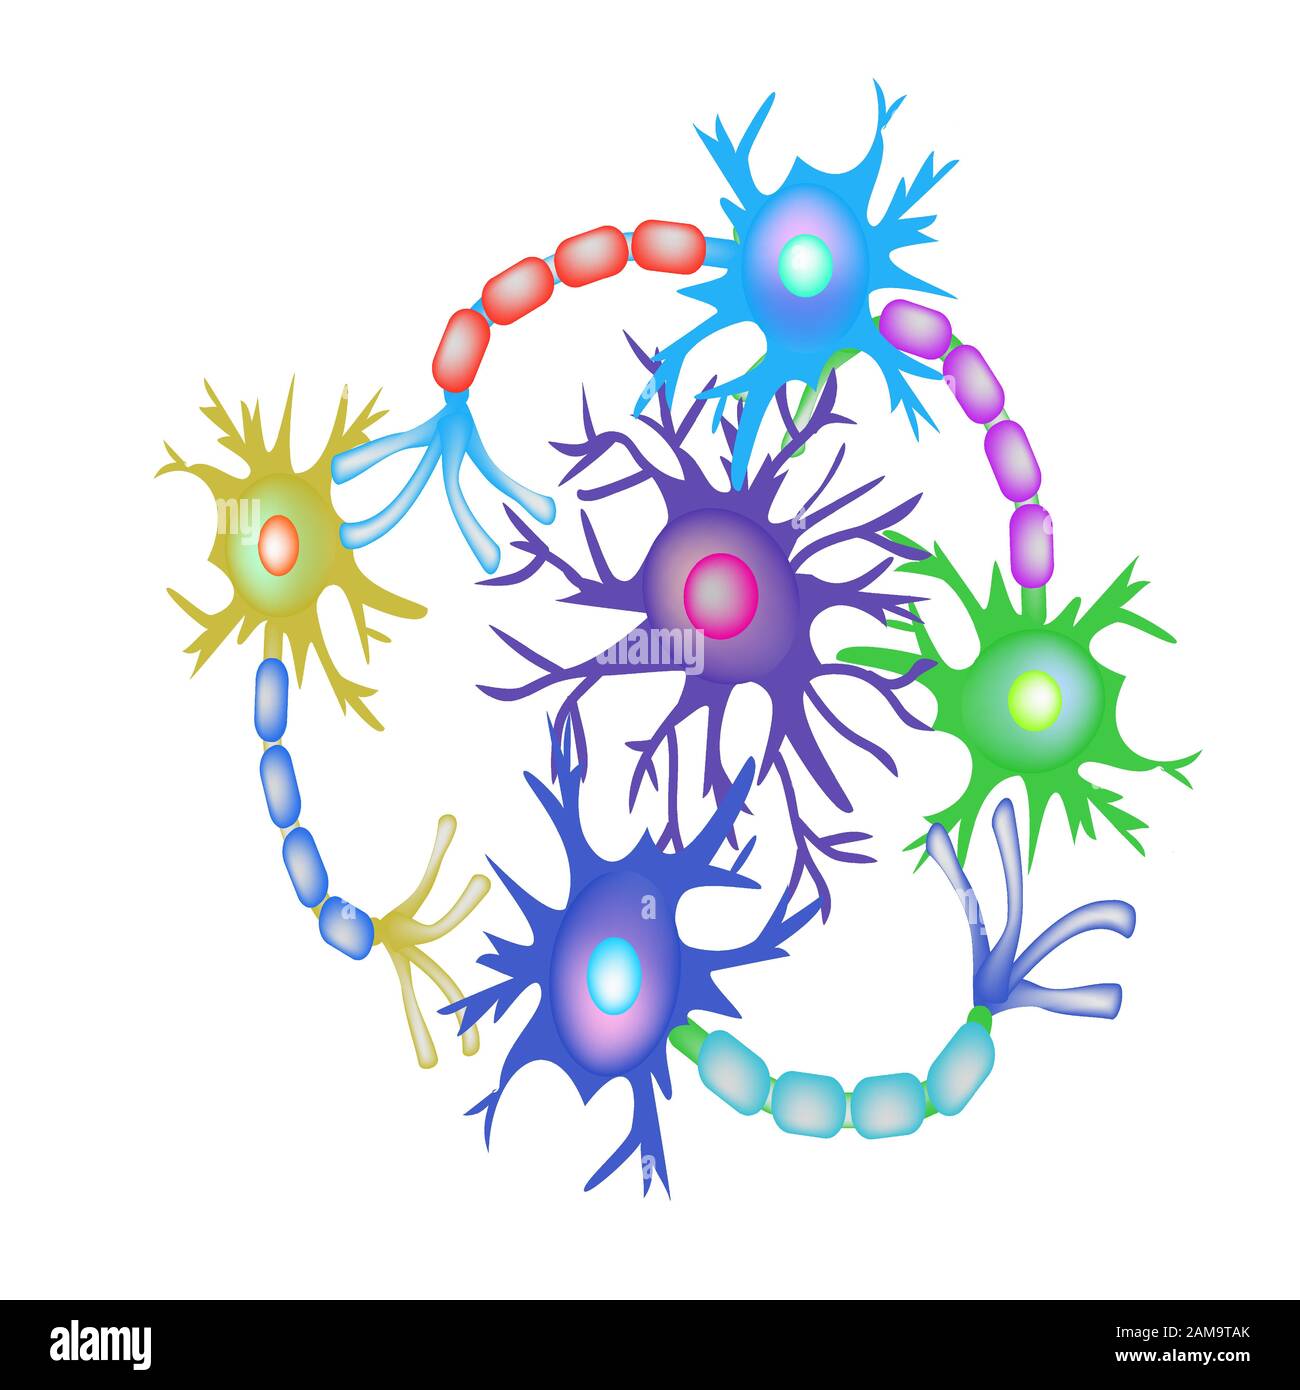 Synapses of neurons. Neural communications background. Synapse communication neuron. Vector illustration on isolated background. Stock Vector